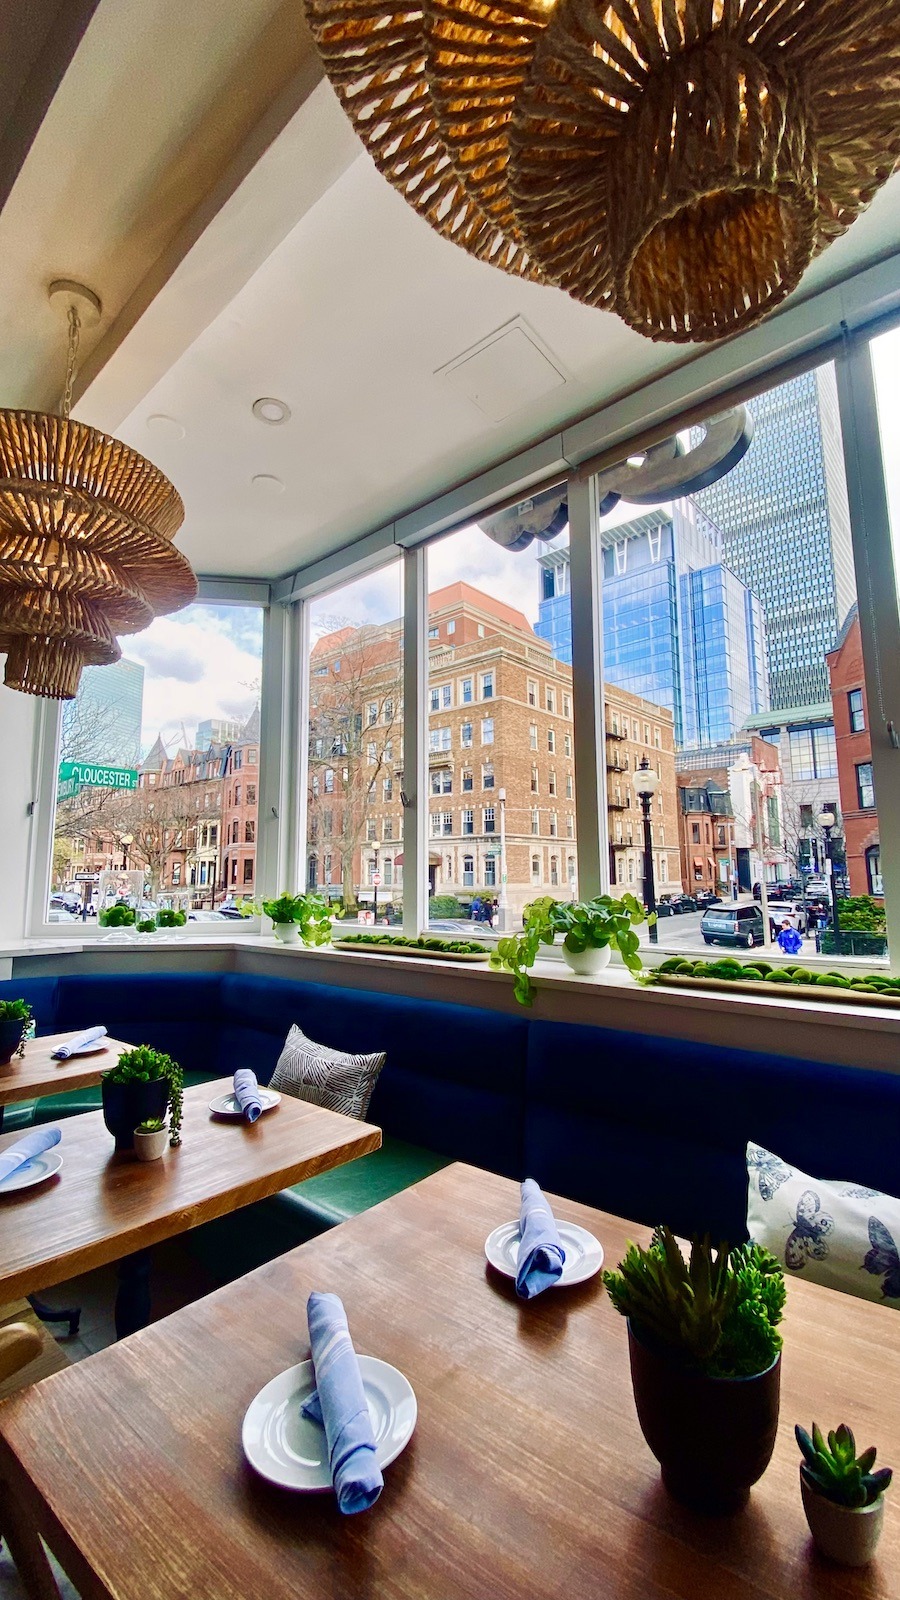 Eat Here Now: The 10 Hottest Restaurants in Boston